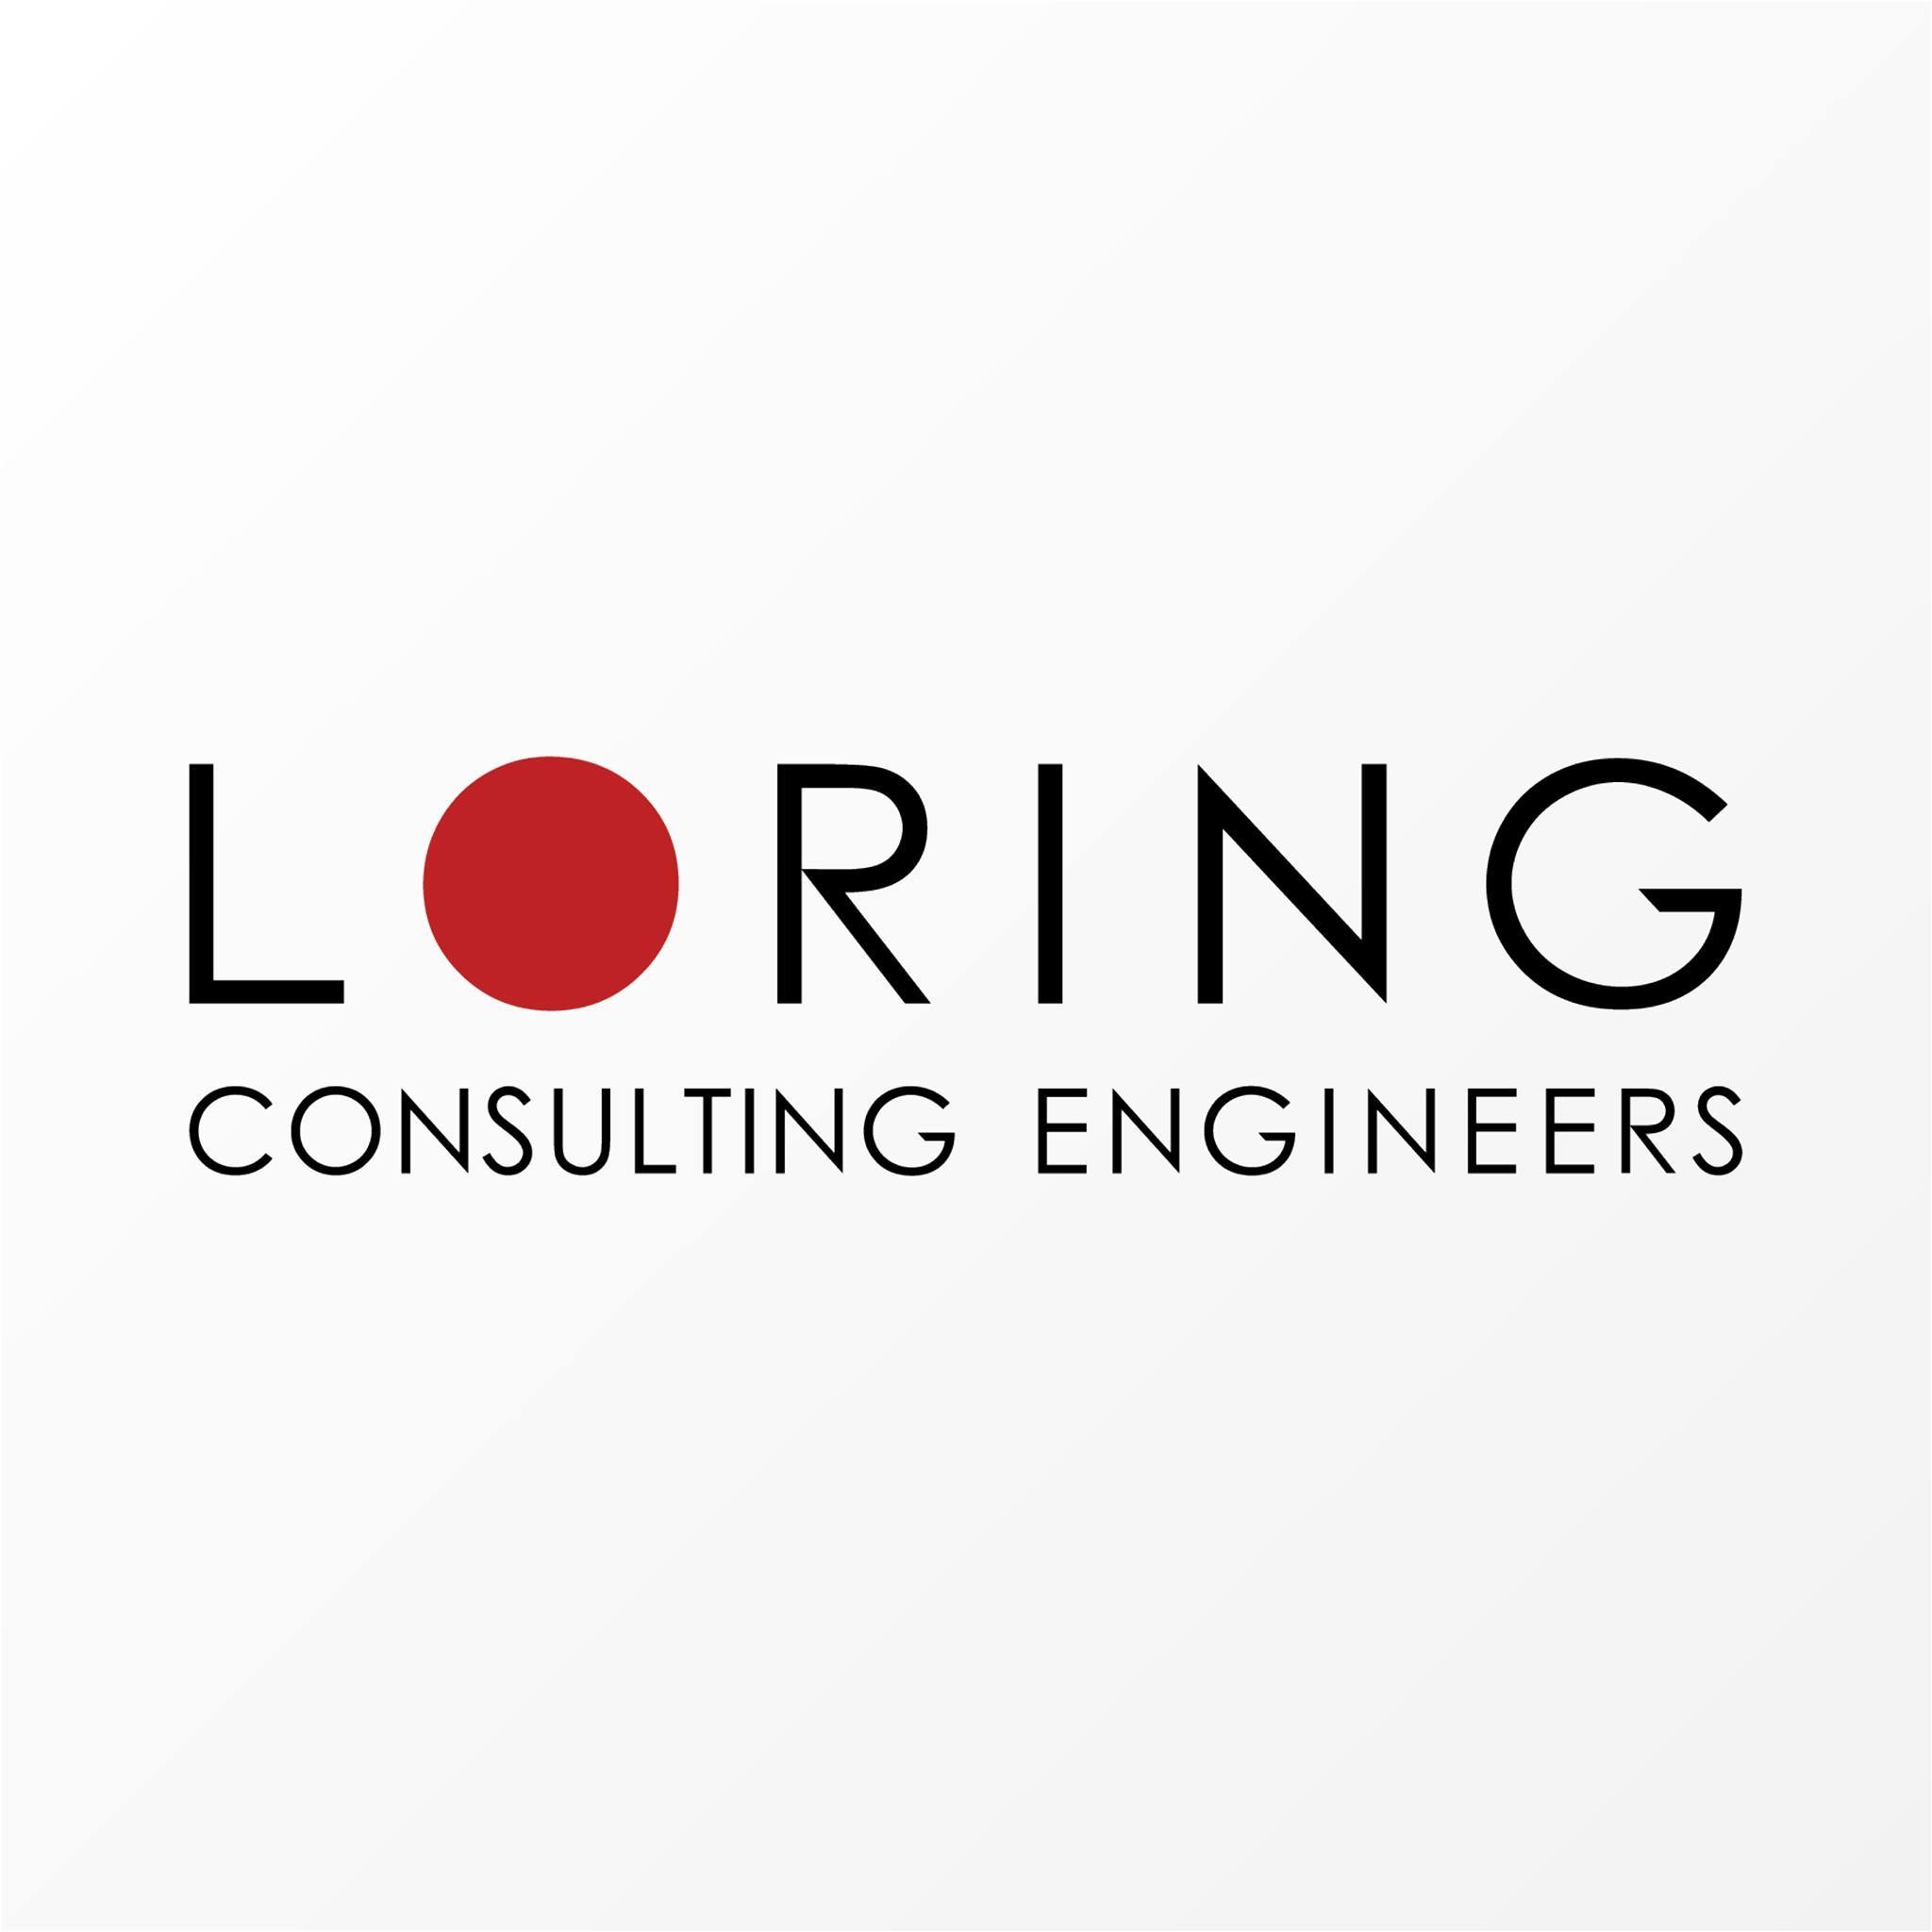 Loring Consulting Engineers